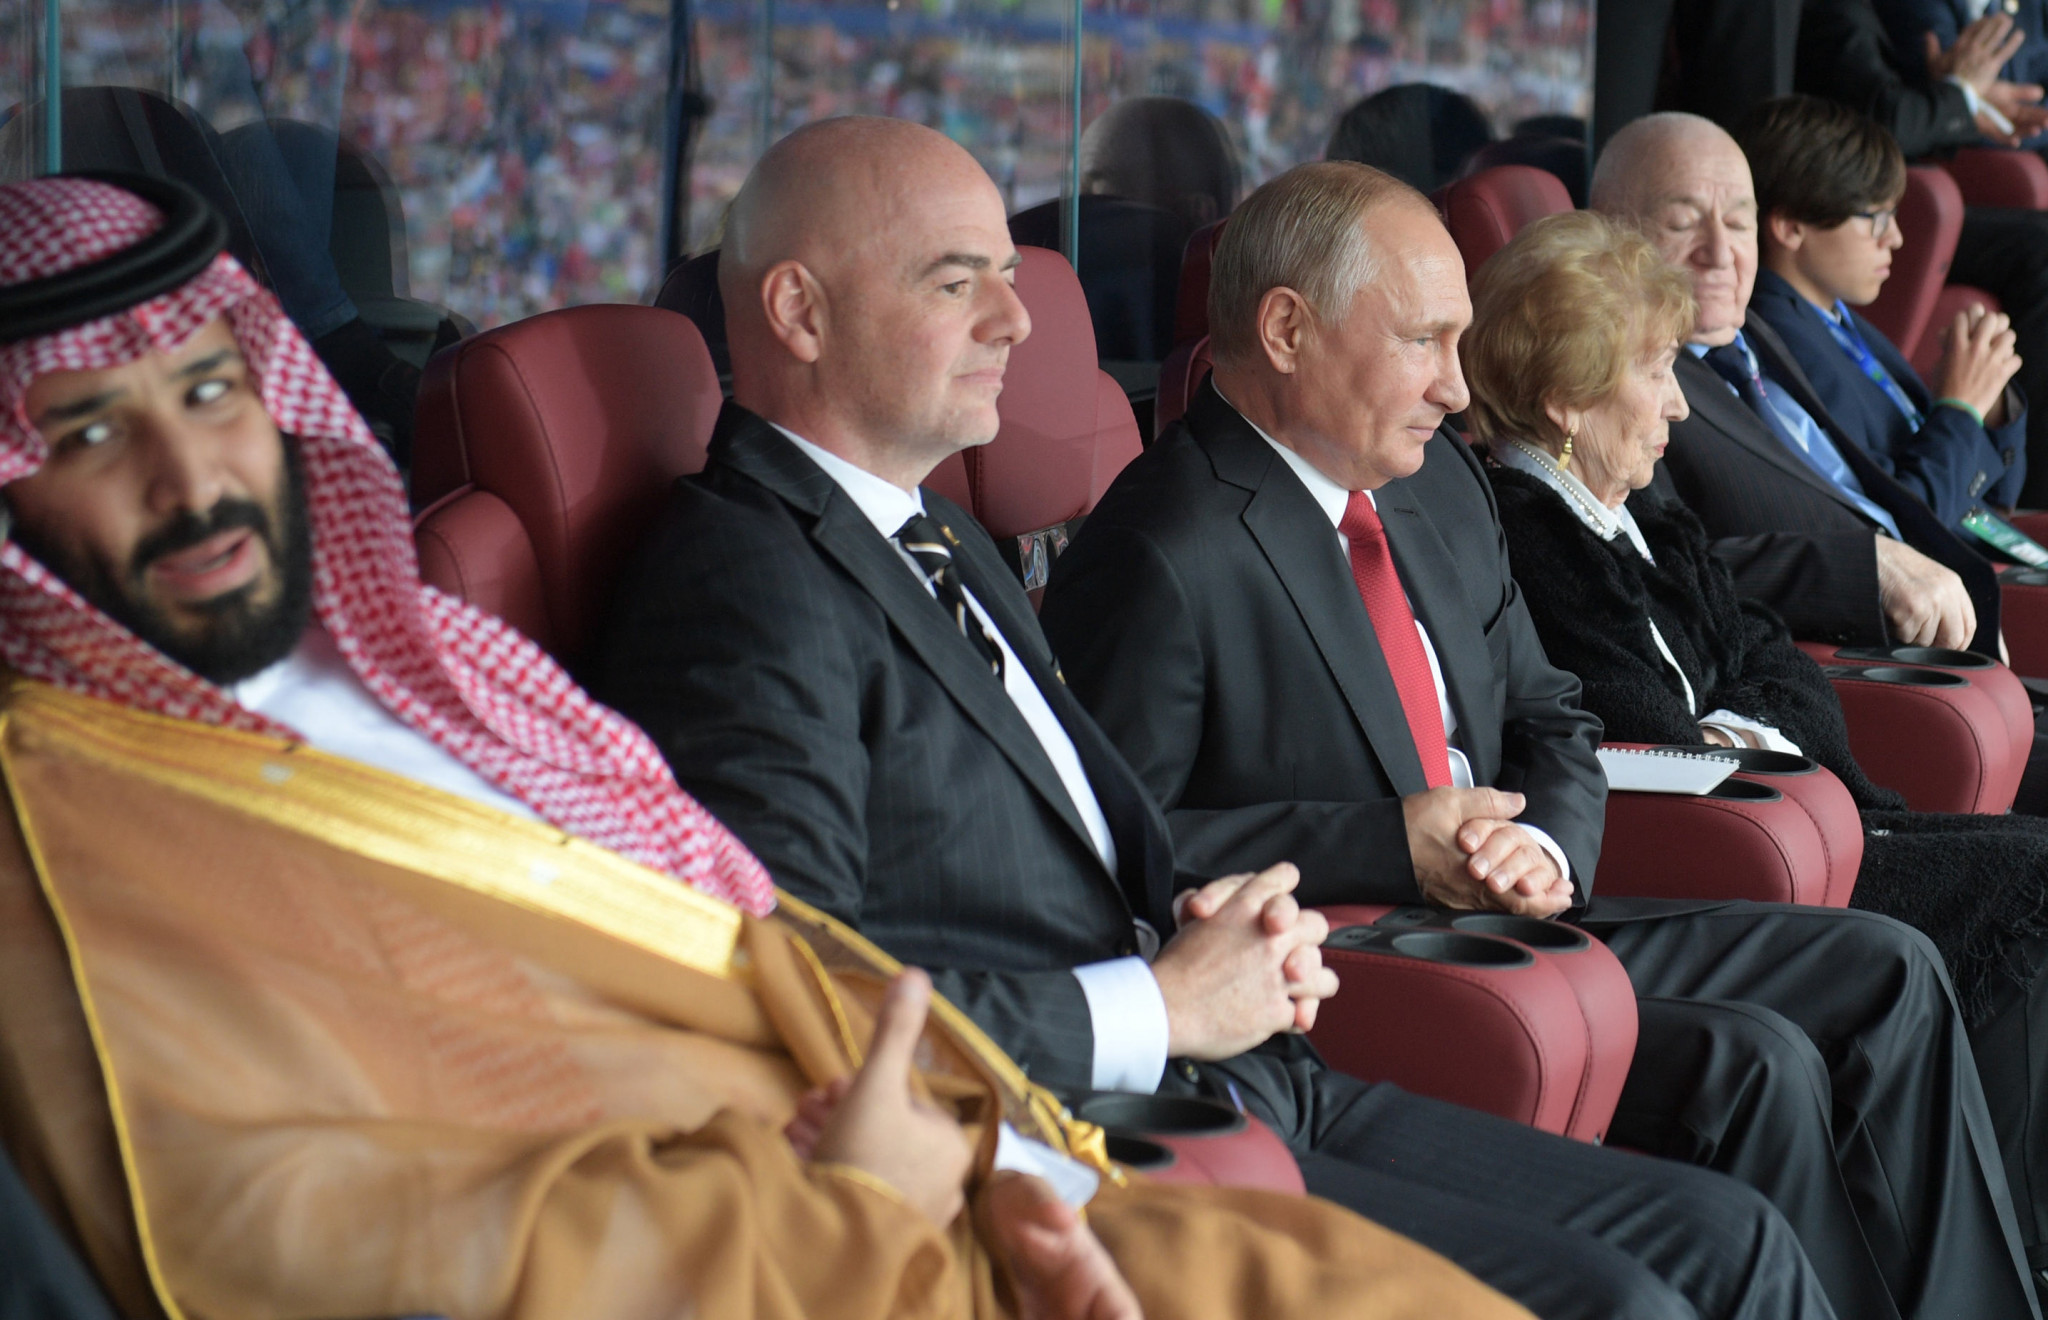 Crown Prince Mohammed bin Salman Al Saud, left, FIFA President Gianni Infantino, centre, and Russian President Vladimir Putin watched the opening match of the 2018 World Cup together ©Getty Images